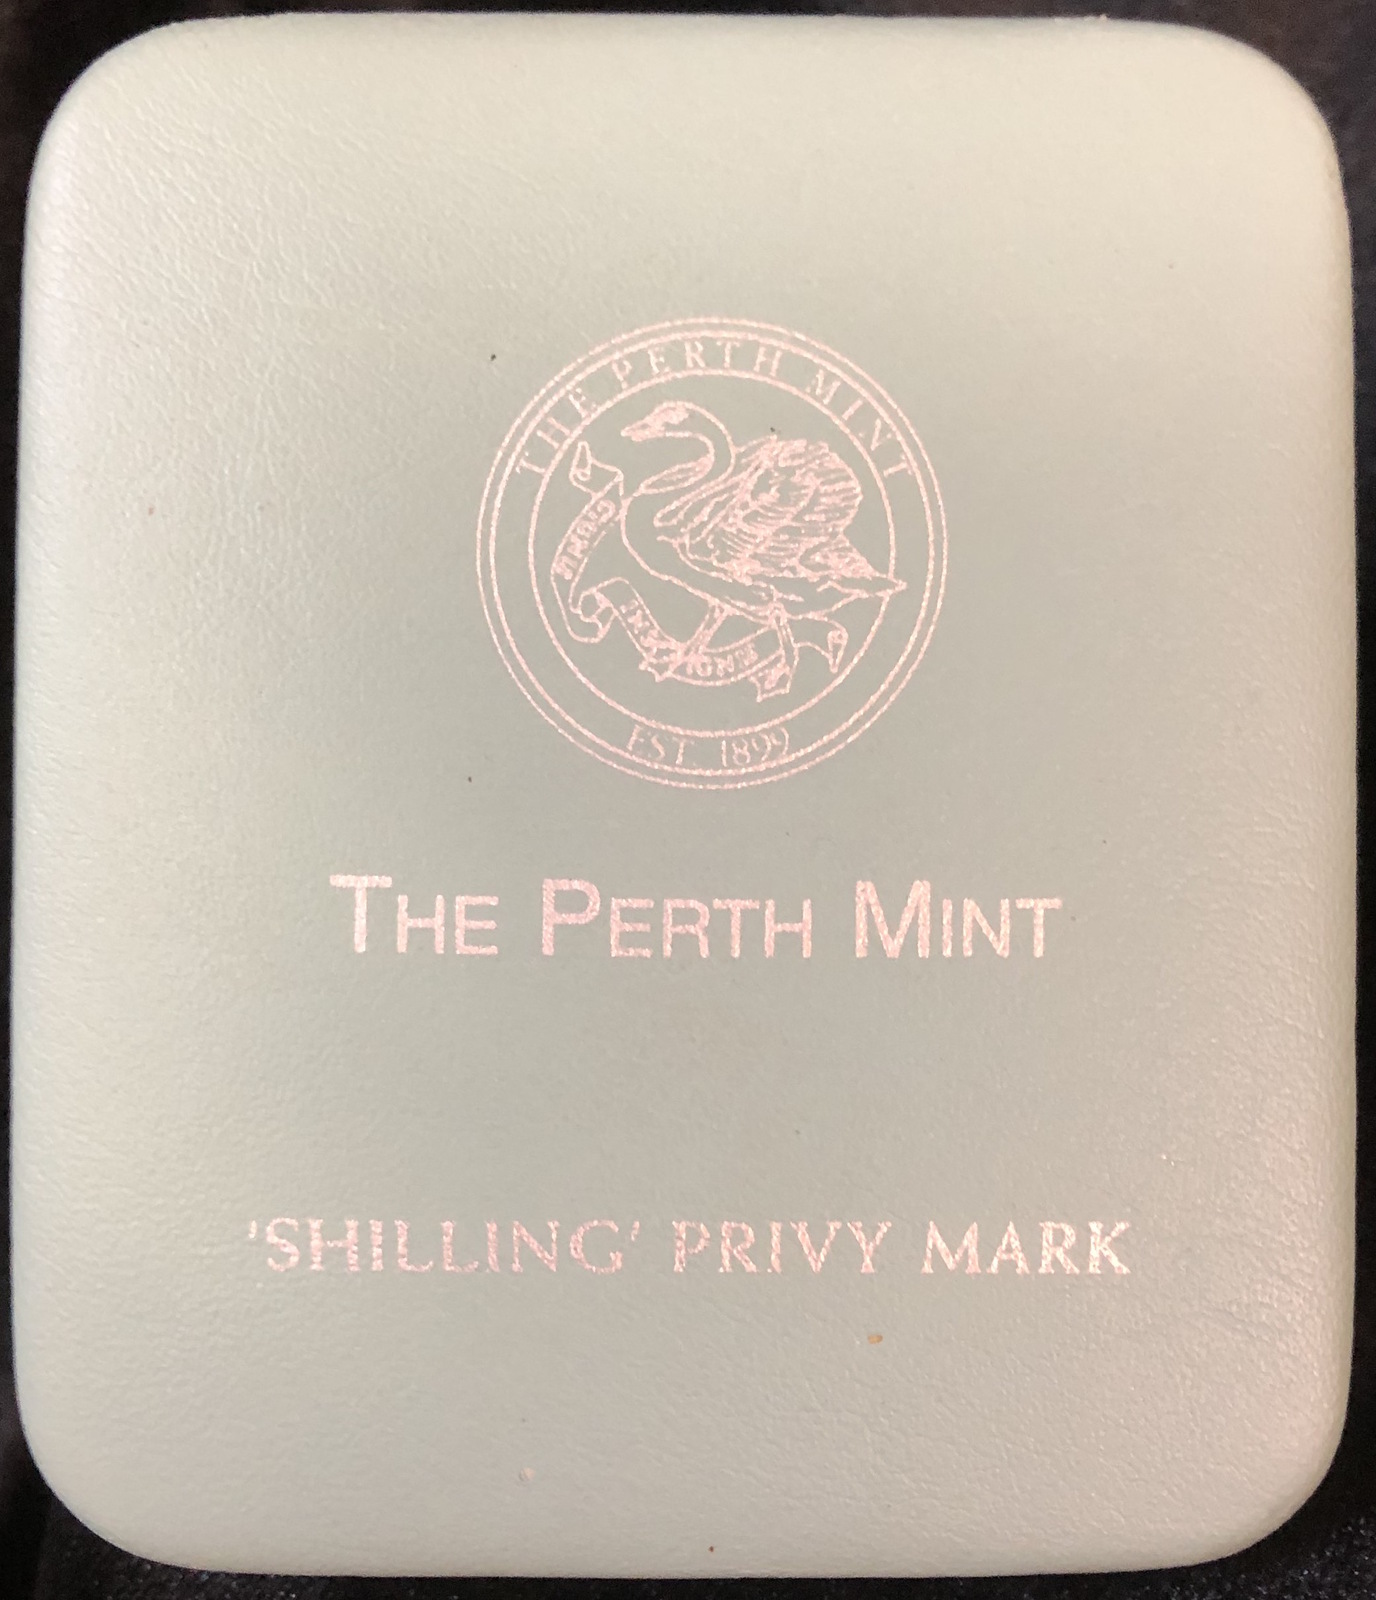 1997 Silver Two Ounce Unc Privy Mark 1937 Shilling product image